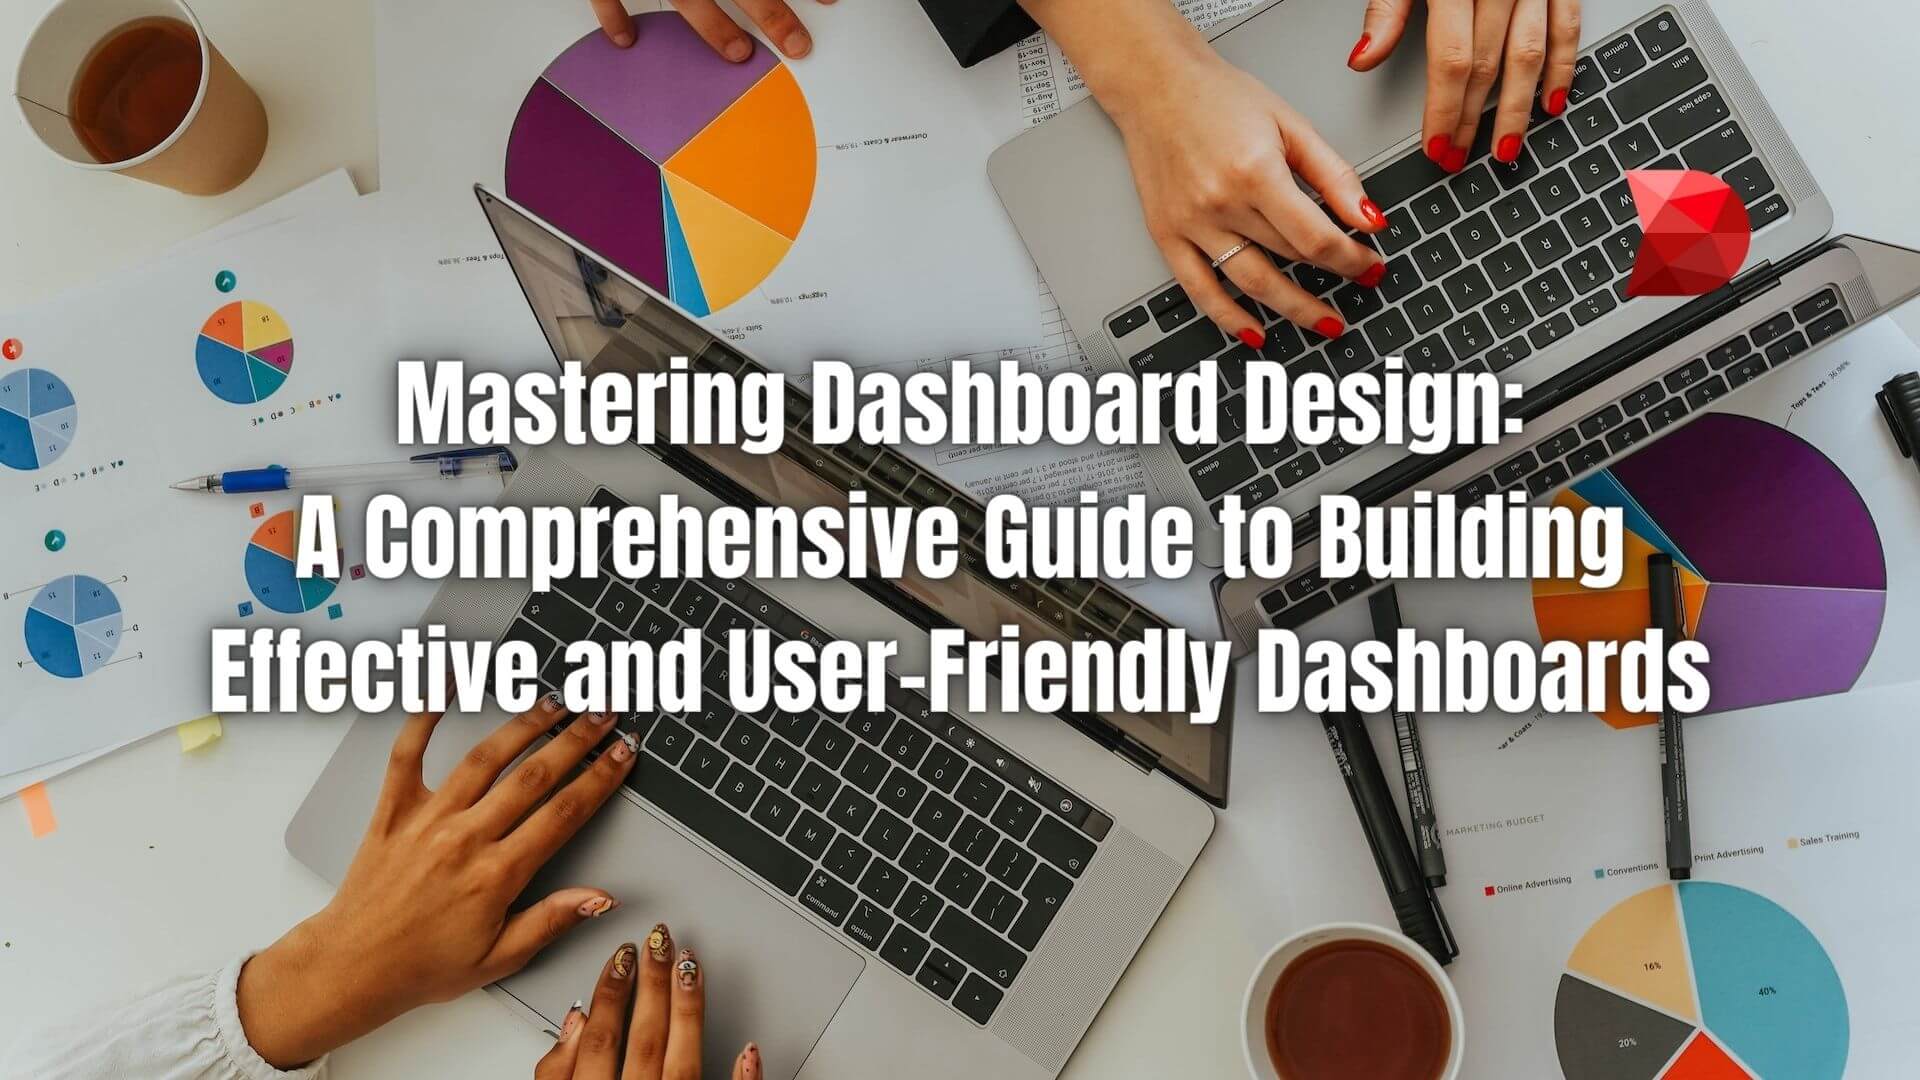 Building an effective dashboard is not a one-time task but a continuous process of refinement and adjustment. Click here to learn more!